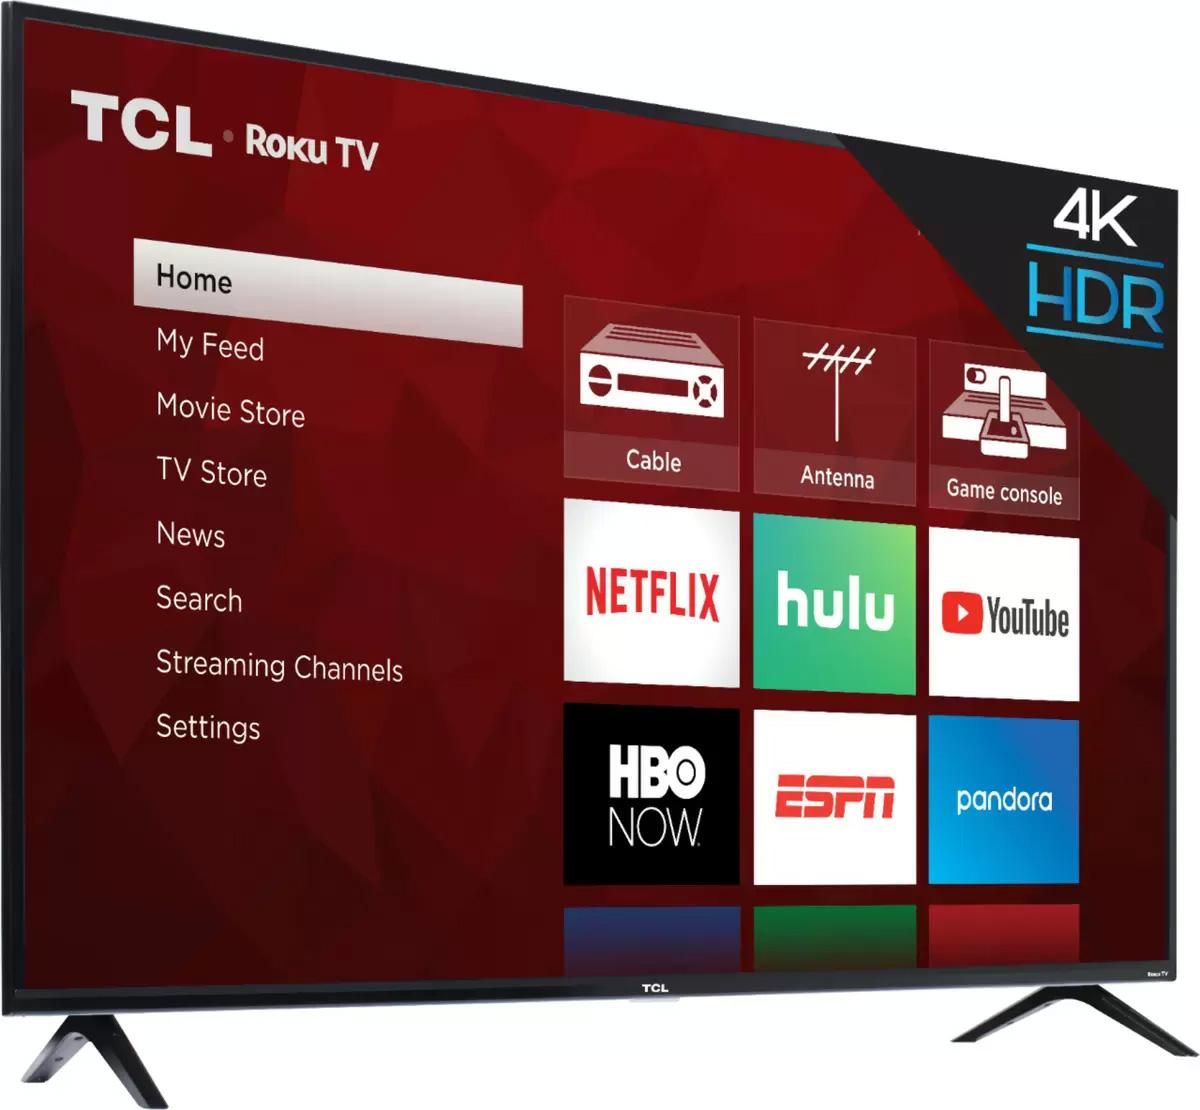 75in TCL 75S421 4K UHD LED Roku Smart TV for $678